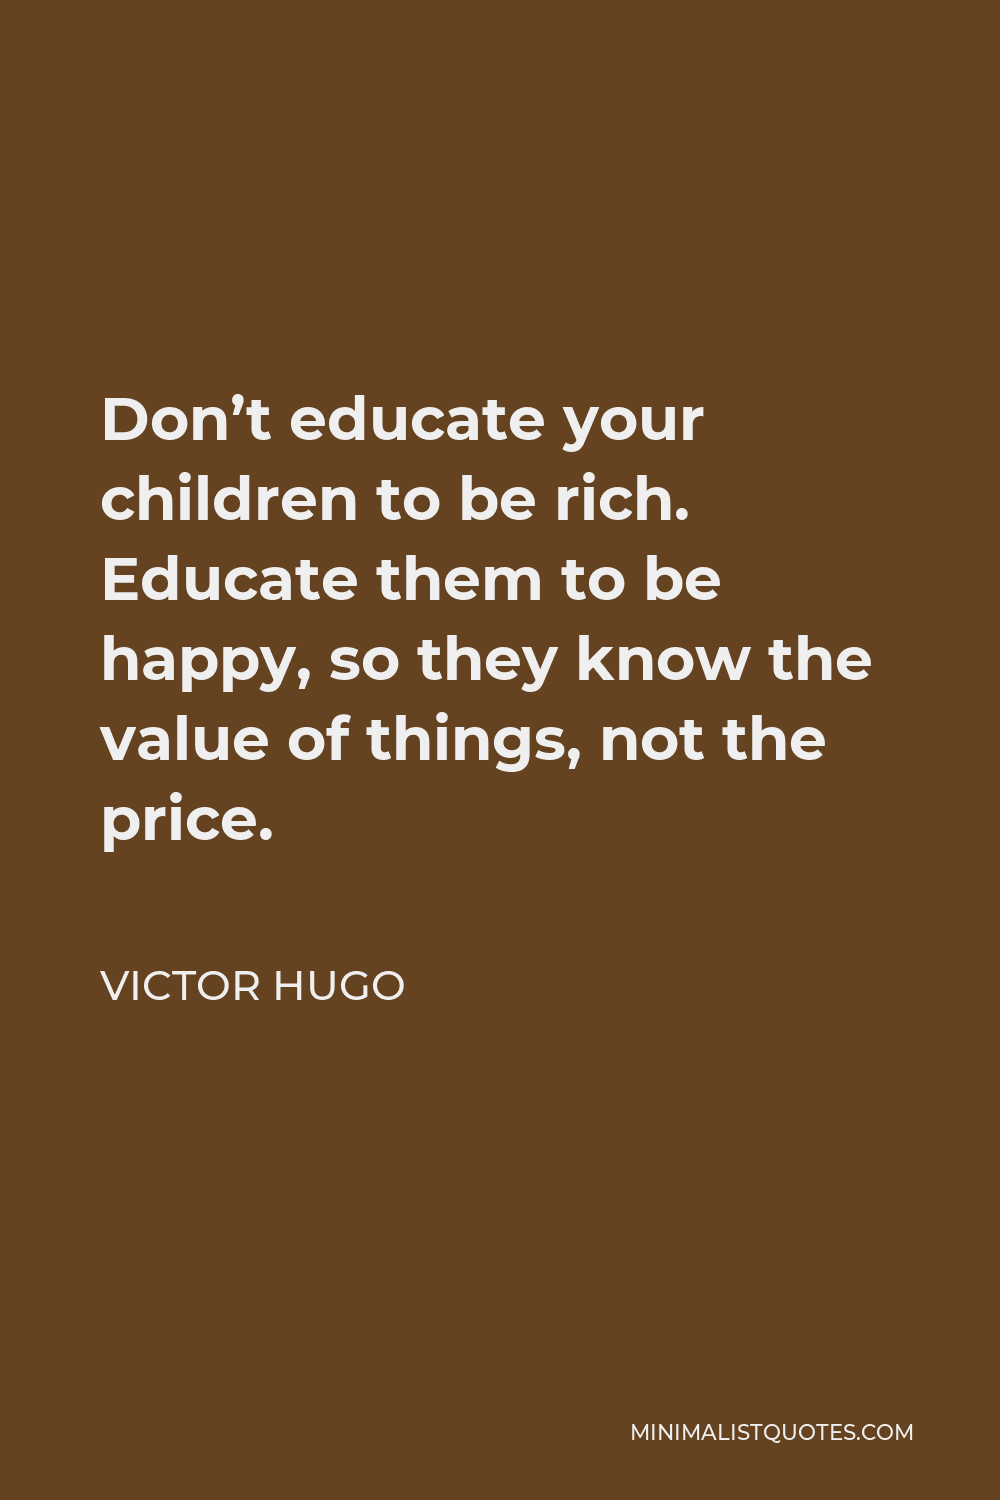 Victor Hugo Quote - Don’t educate your children to be rich. Educate them to be happy, so they know the value of things, not the price.